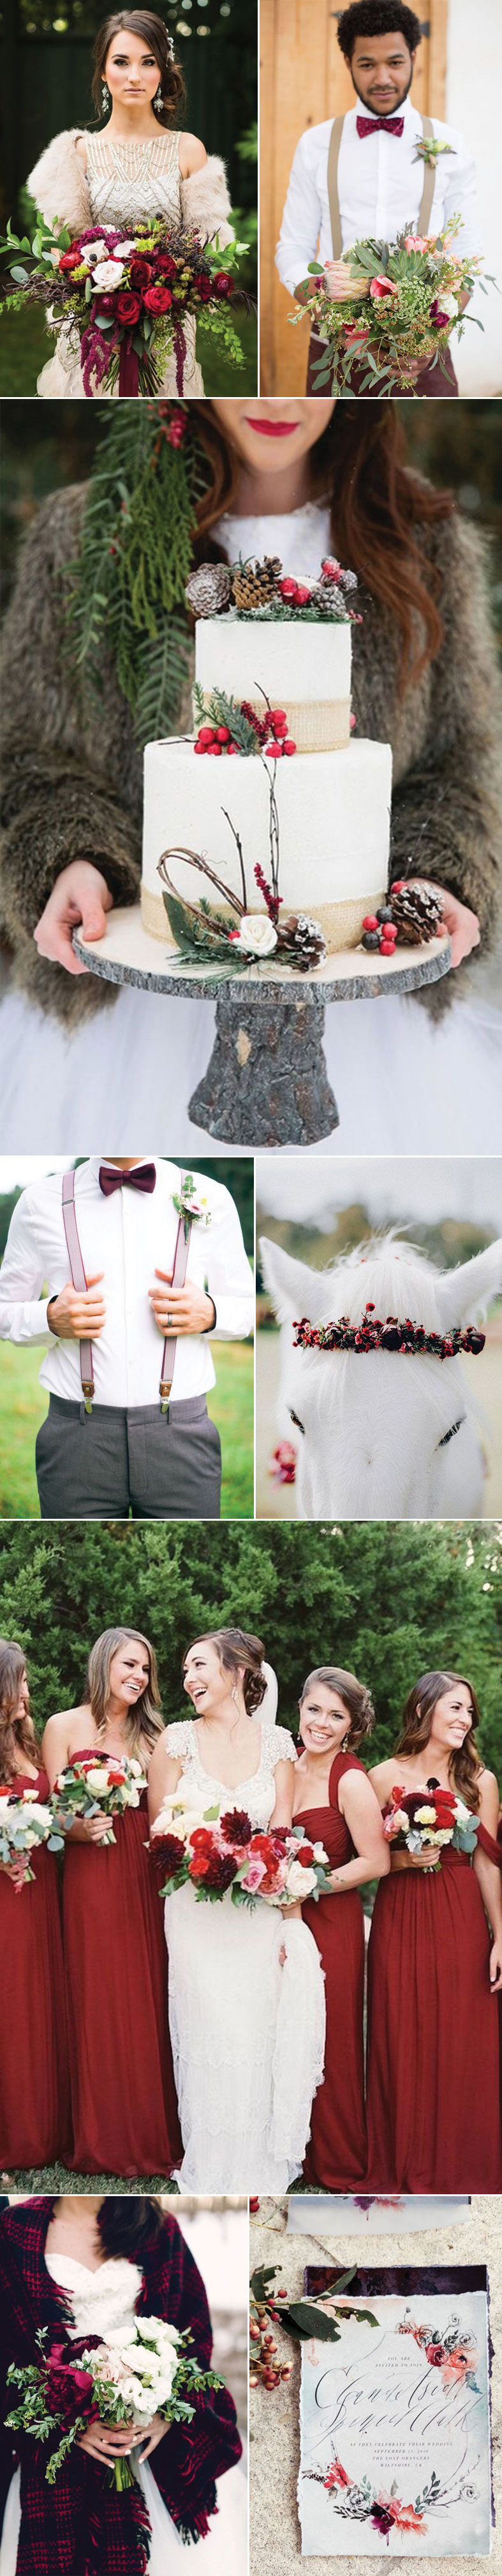 Winter Wedding in Berry Hues